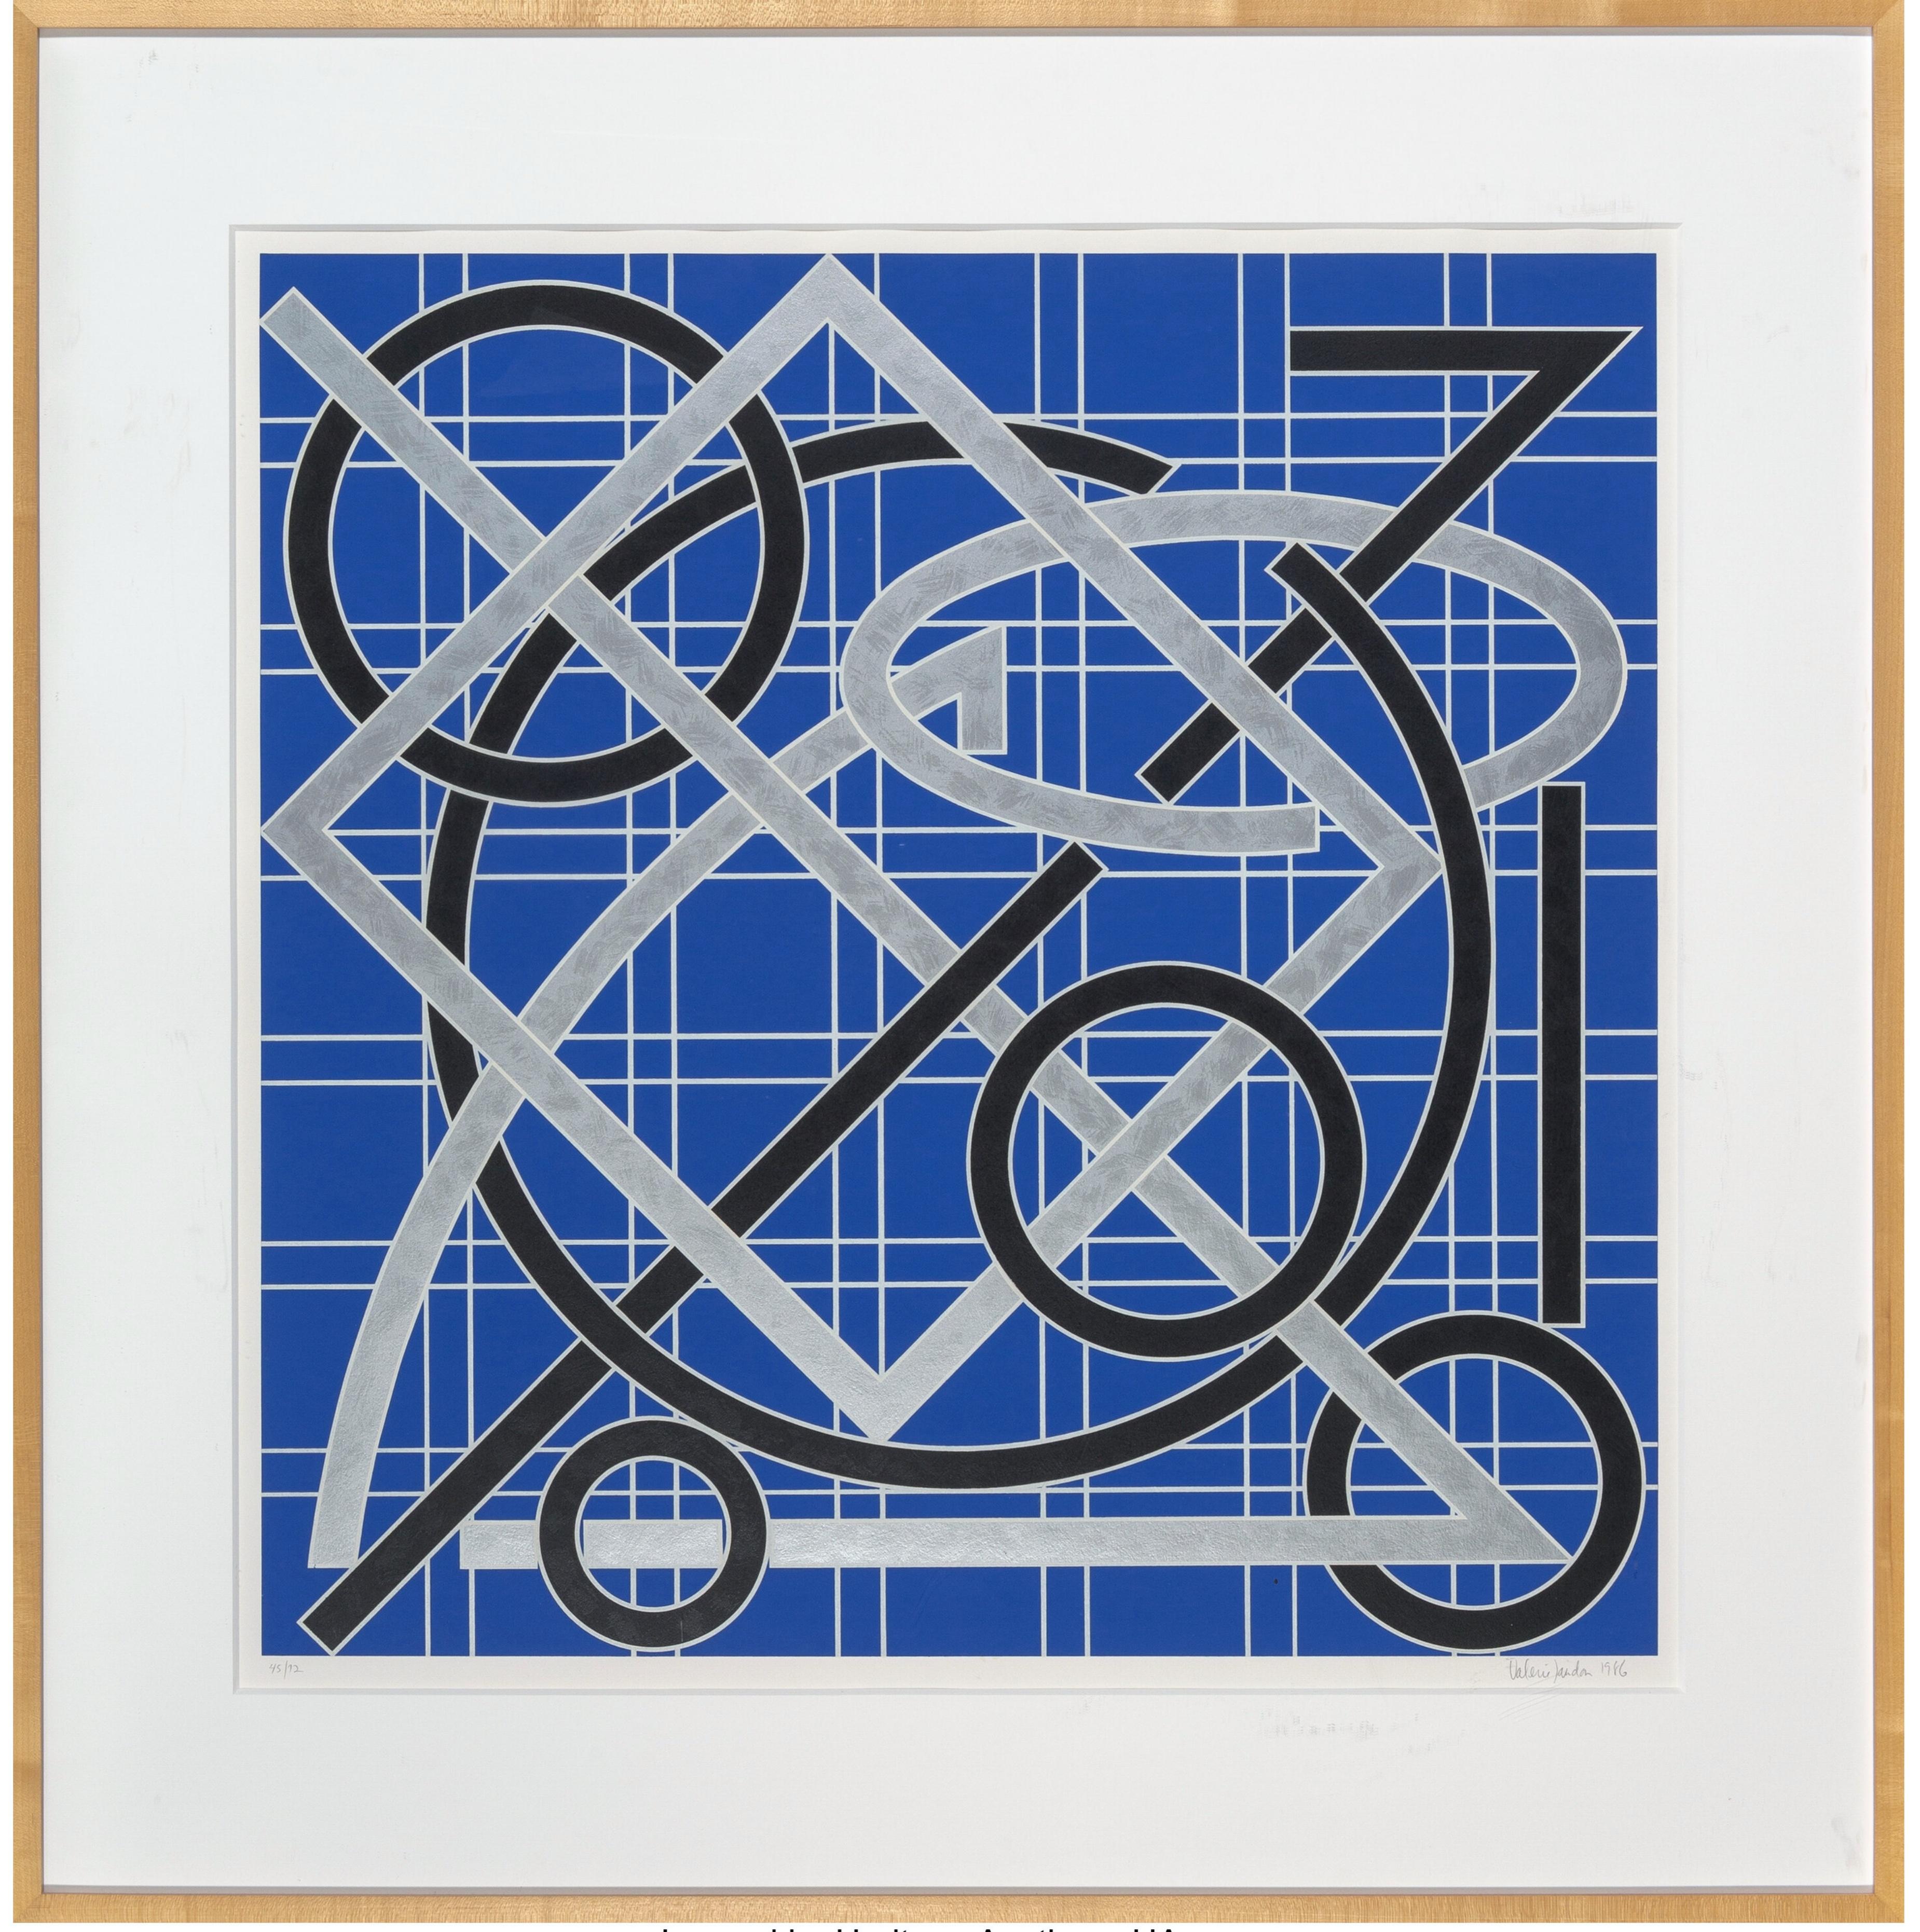 Lincoln Center Information Center - Abstract Geometric Print by Valerie Jaudon